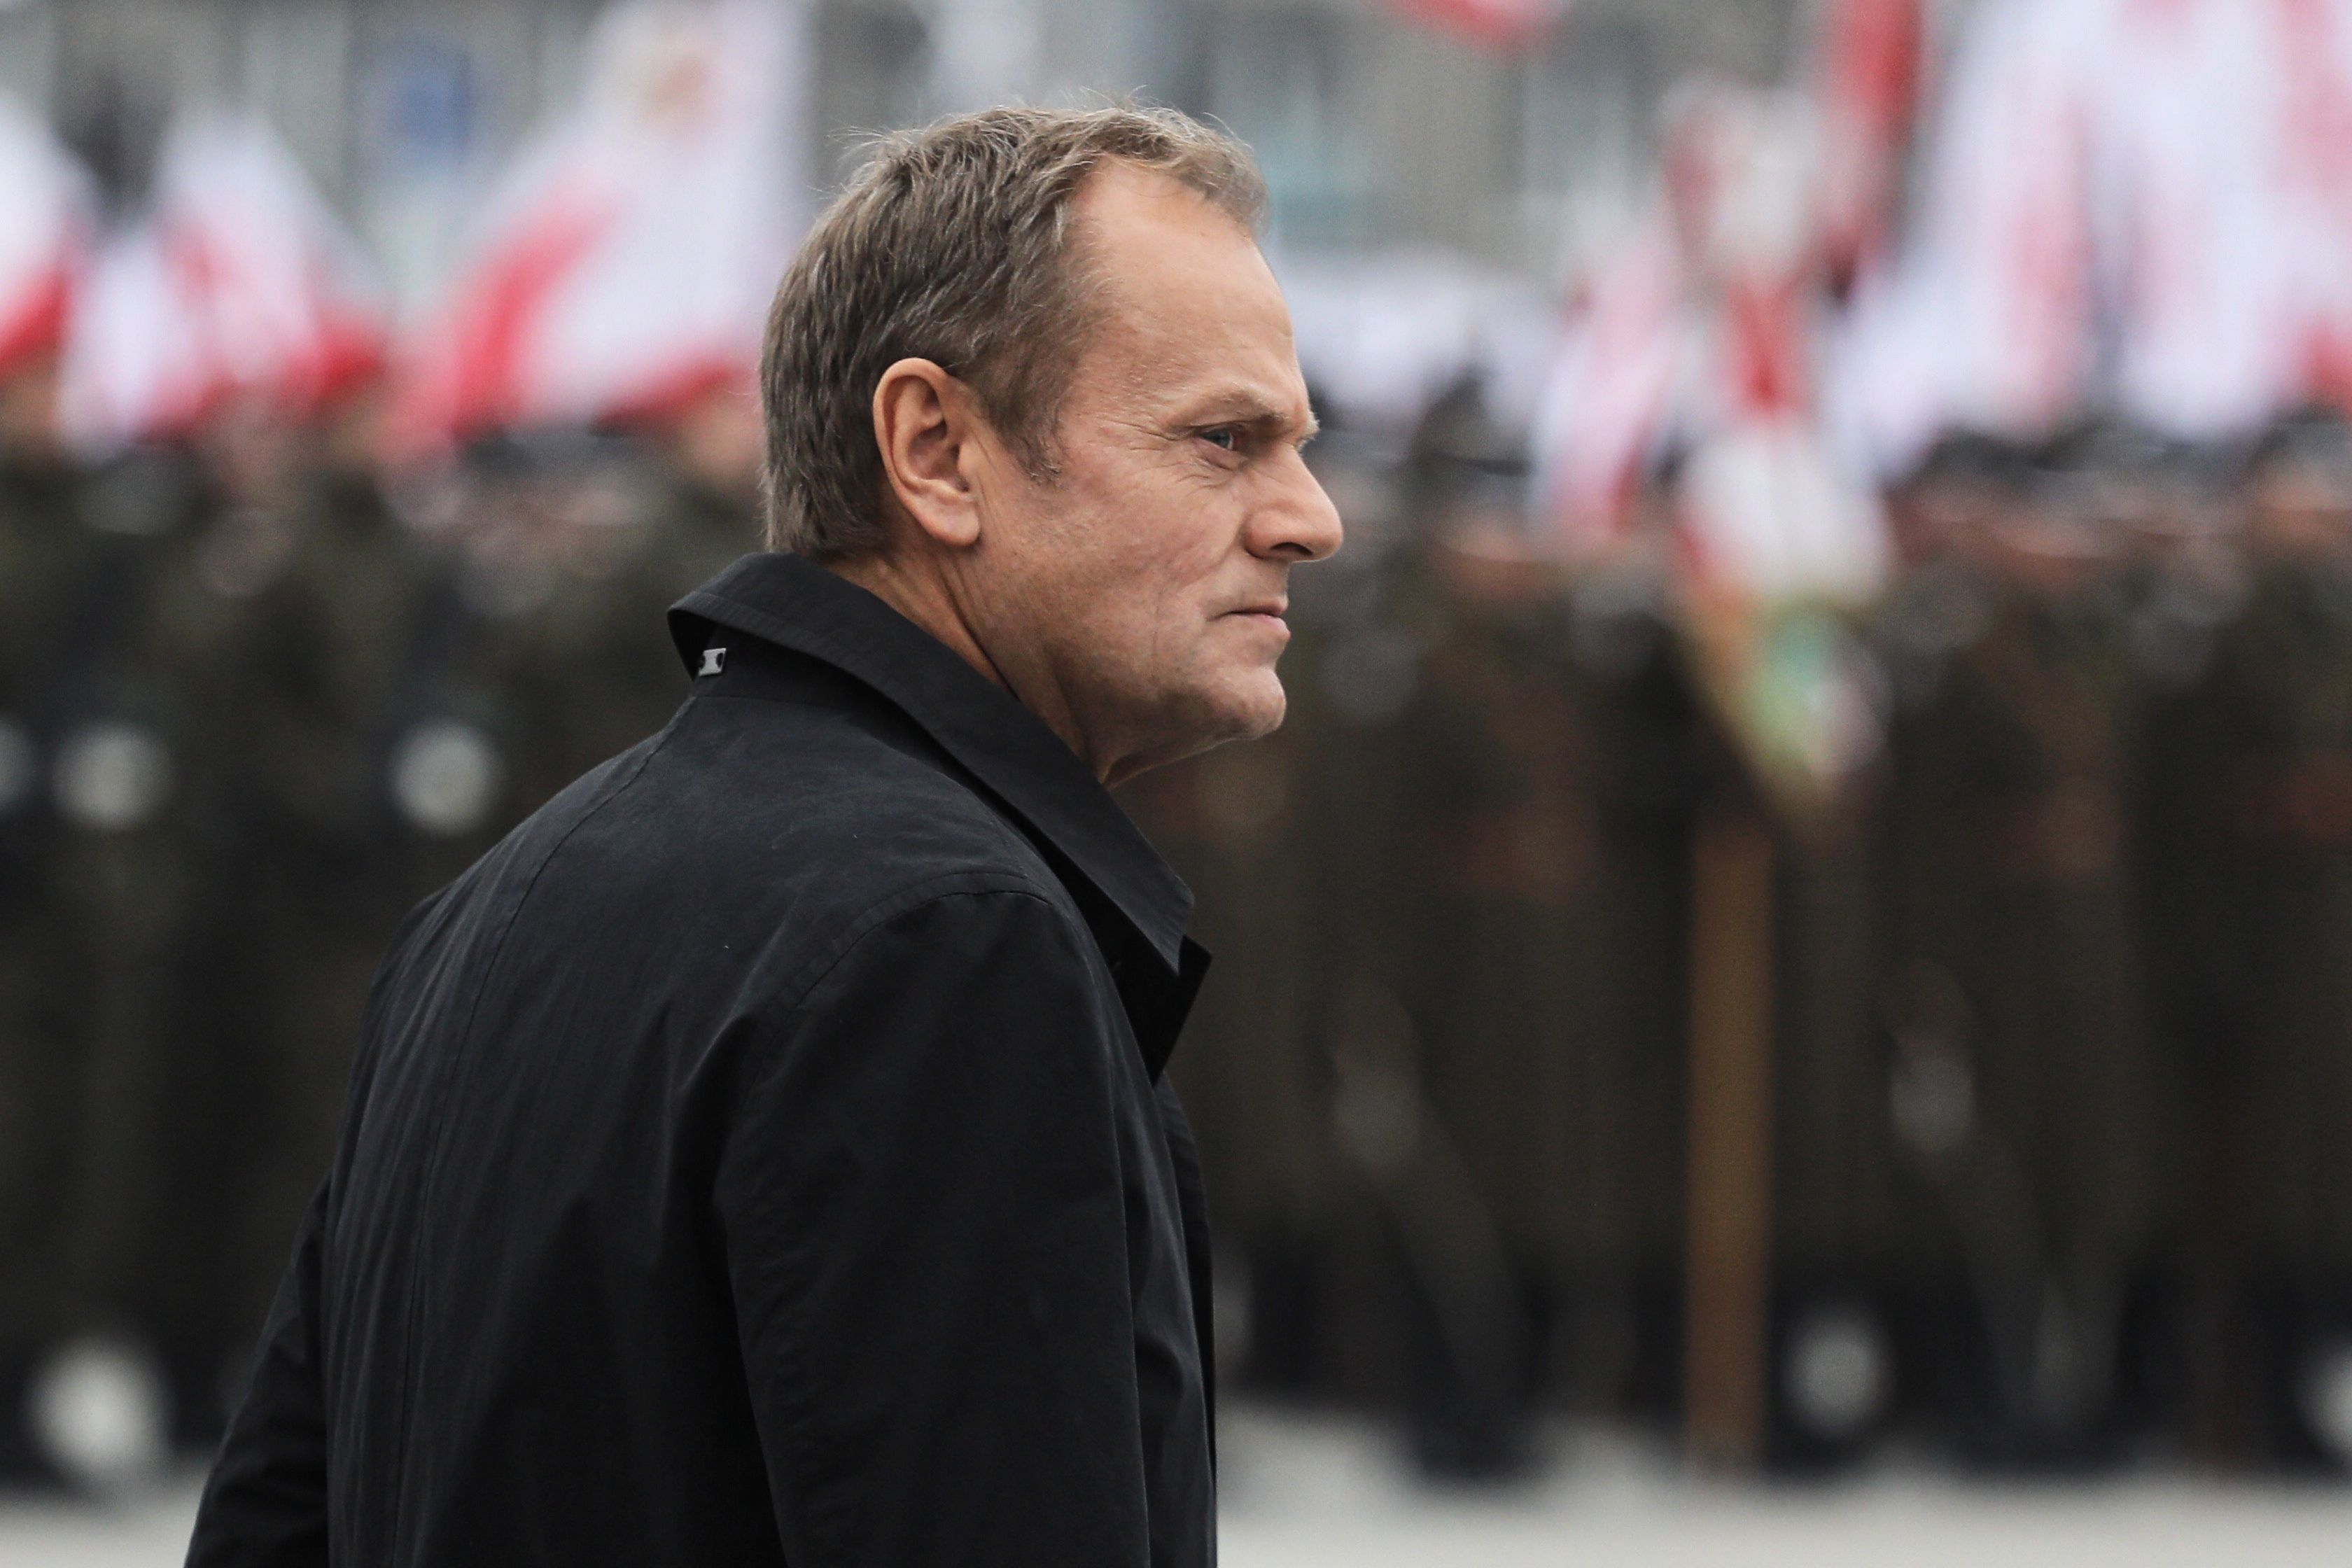 European Council President Donald Tusk attends a ceremony marking Polish Independence Day at the Tomb of Unknown Soldier in Warsaw, Poland, on Nov. 11, 2018. (PAWEL SUPERNAK—EPA-EFE/REX/Shutterstock)